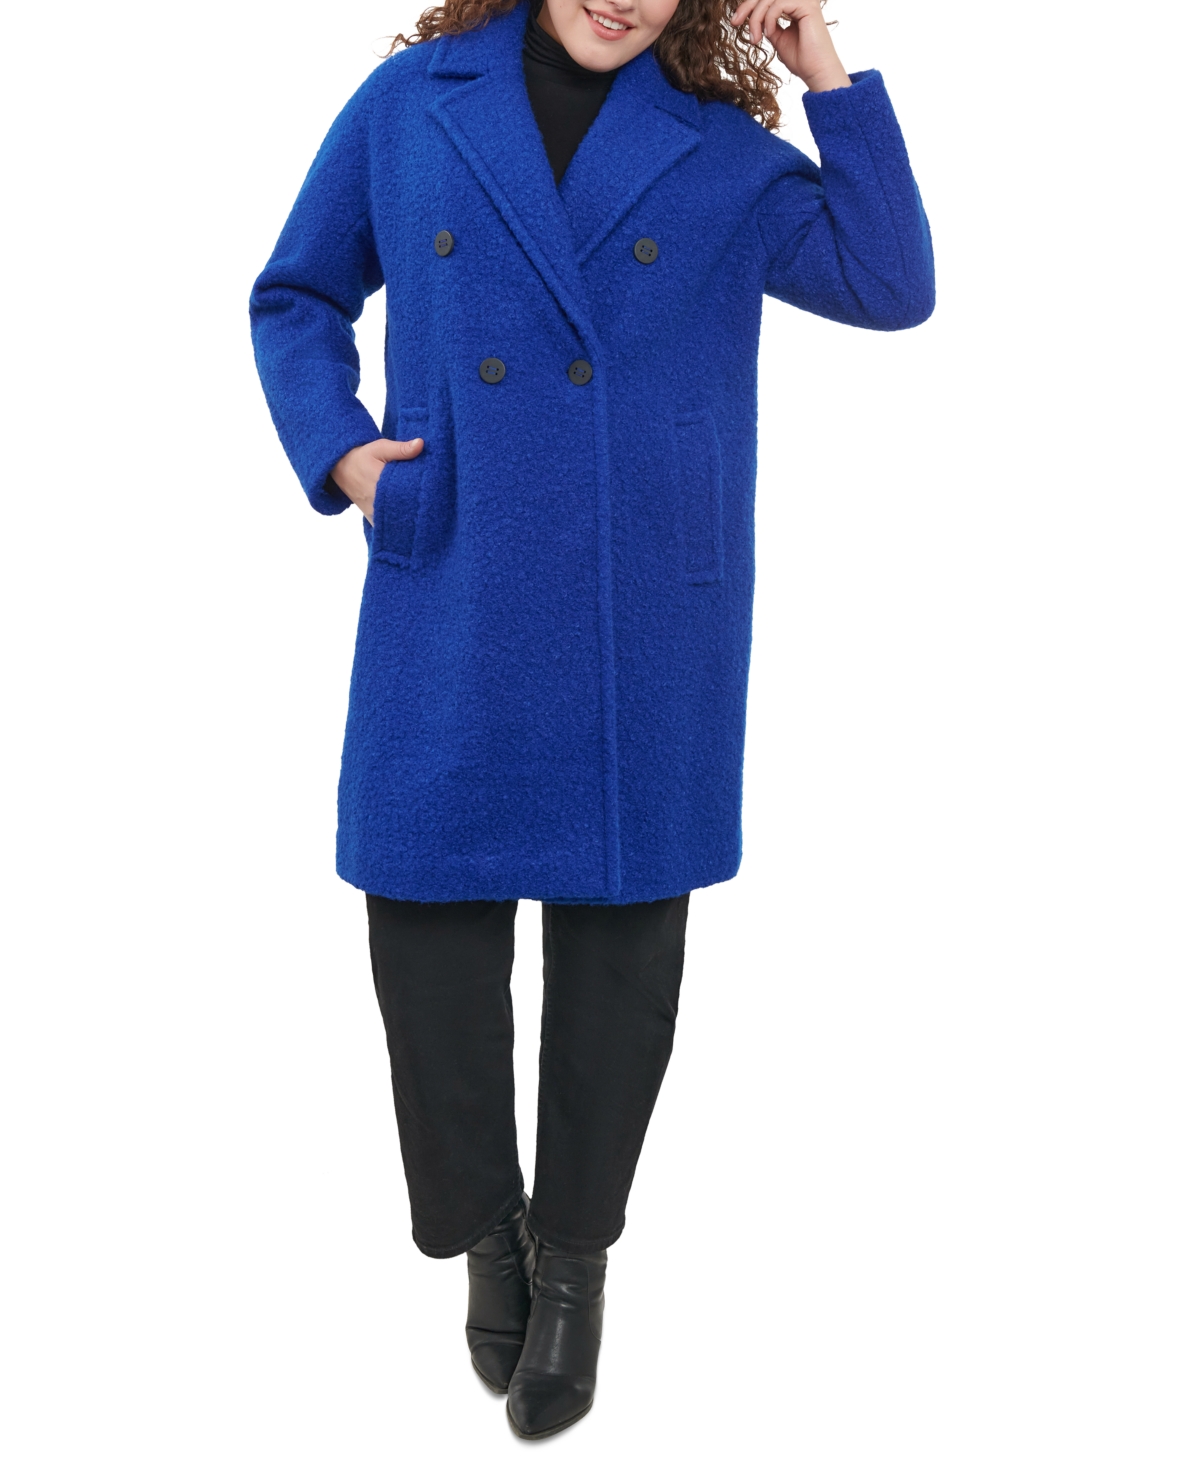 Women's Plus Size Double-Breasted Boucle Walker Coat, Created for Macy's - Royal Blue